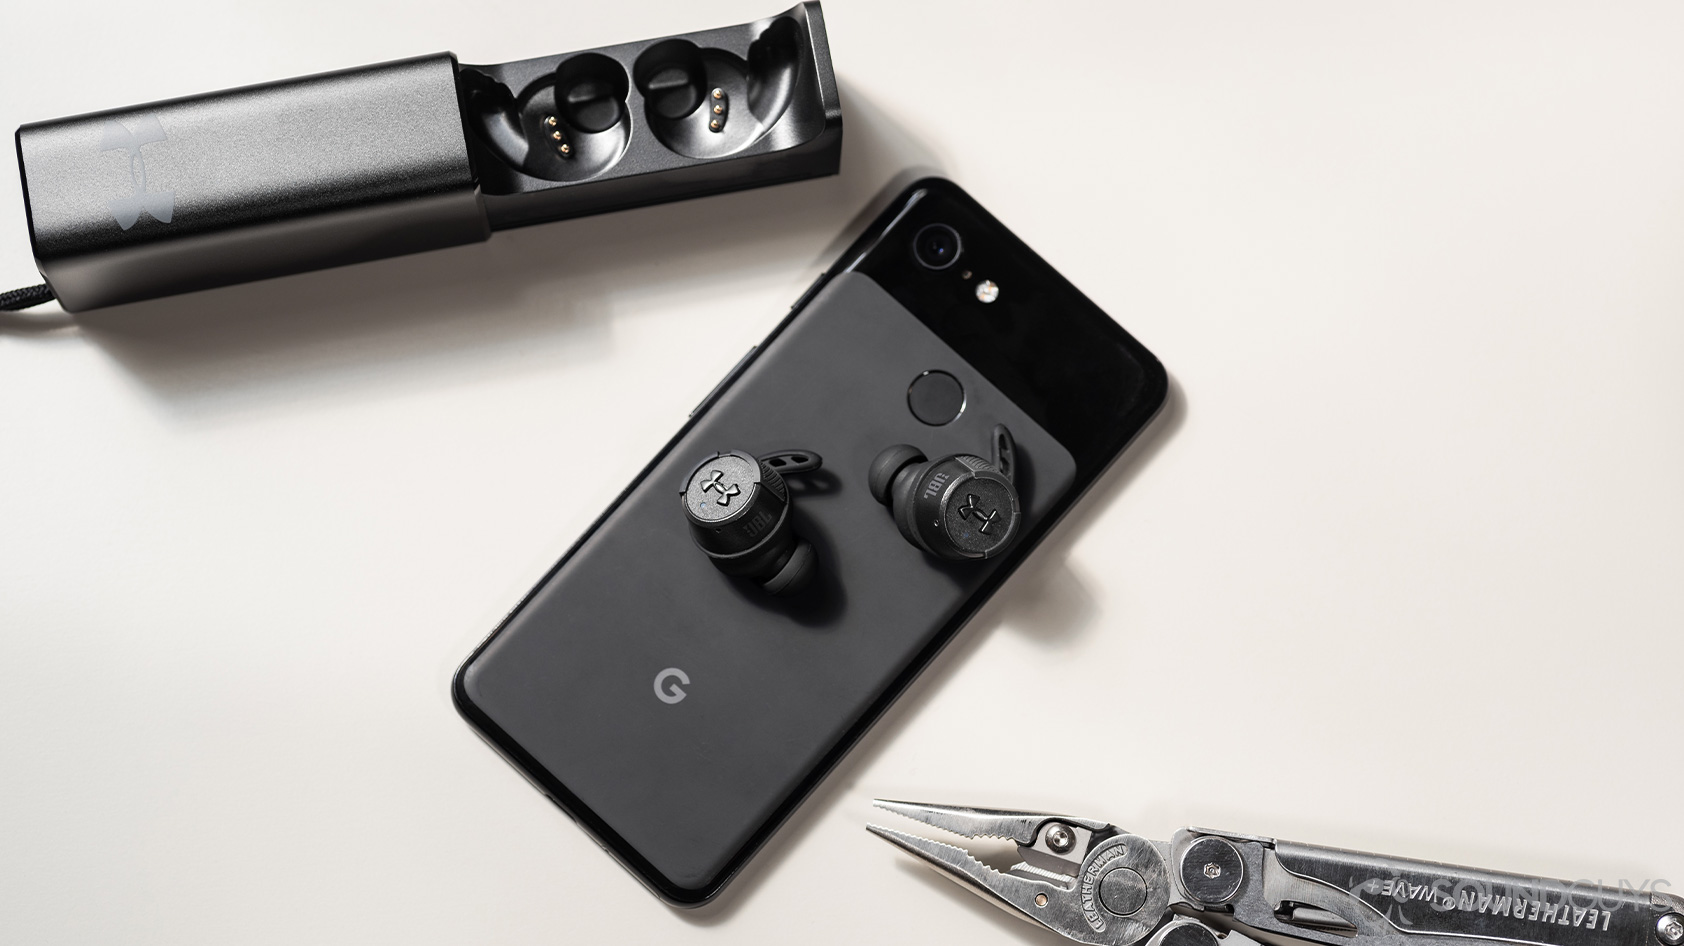 The UA True Wireless FLASH X by JBL on a Google Pixel 3 smartphone, next to the open charging case and a Leatherman Wave+ on a white surface.